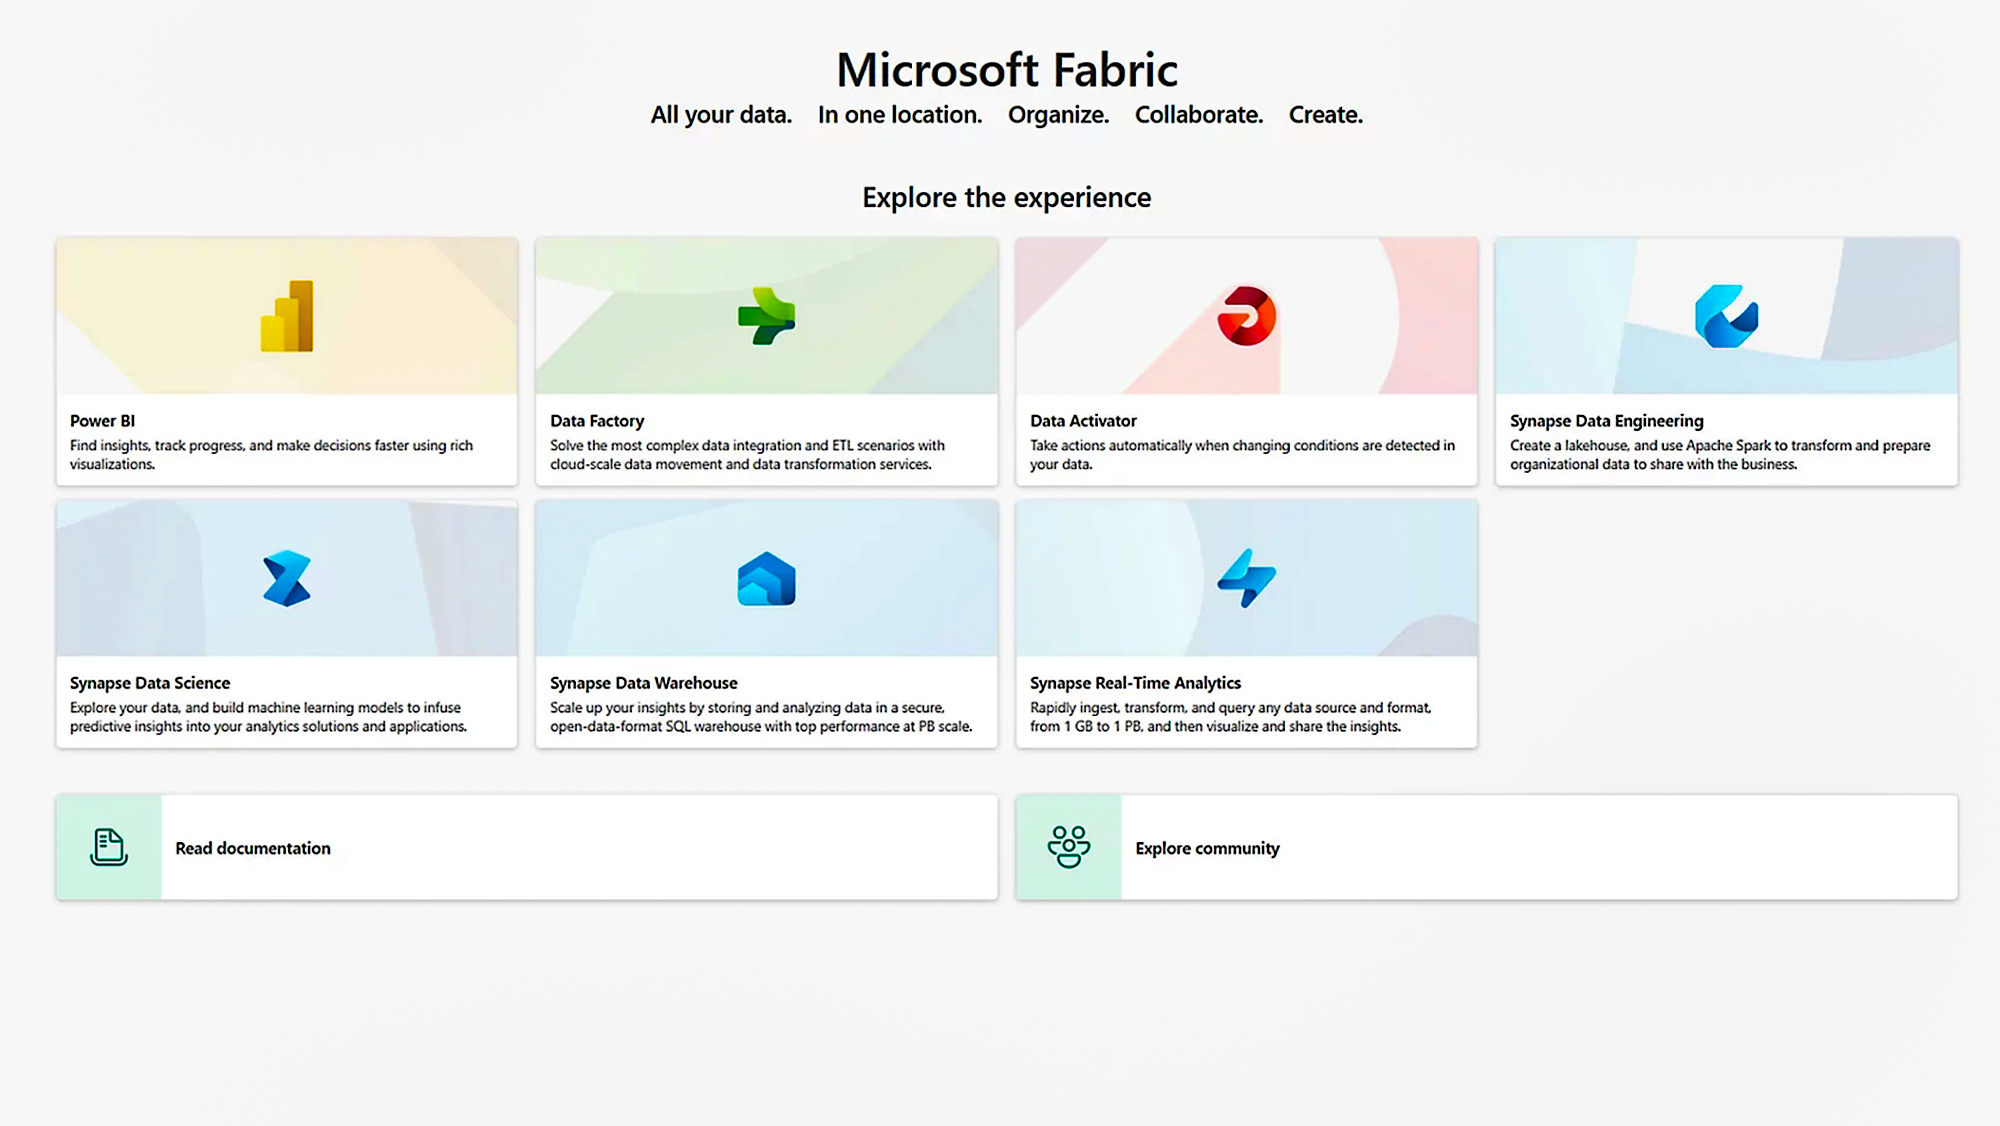 included in Microsoft Fabric